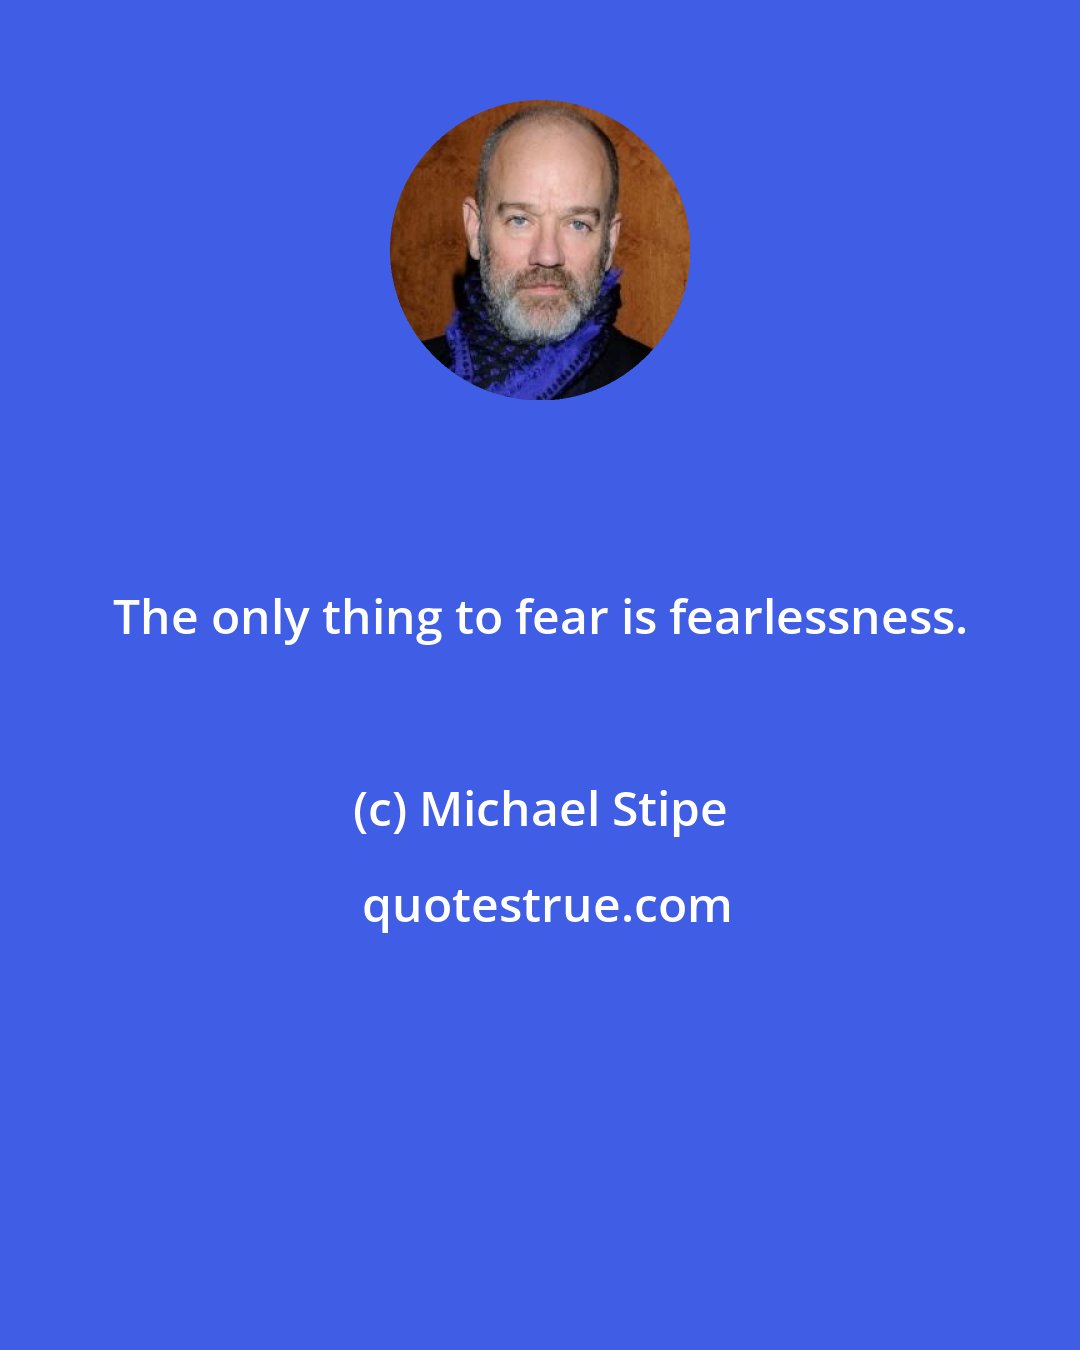 Michael Stipe: The only thing to fear is fearlessness.